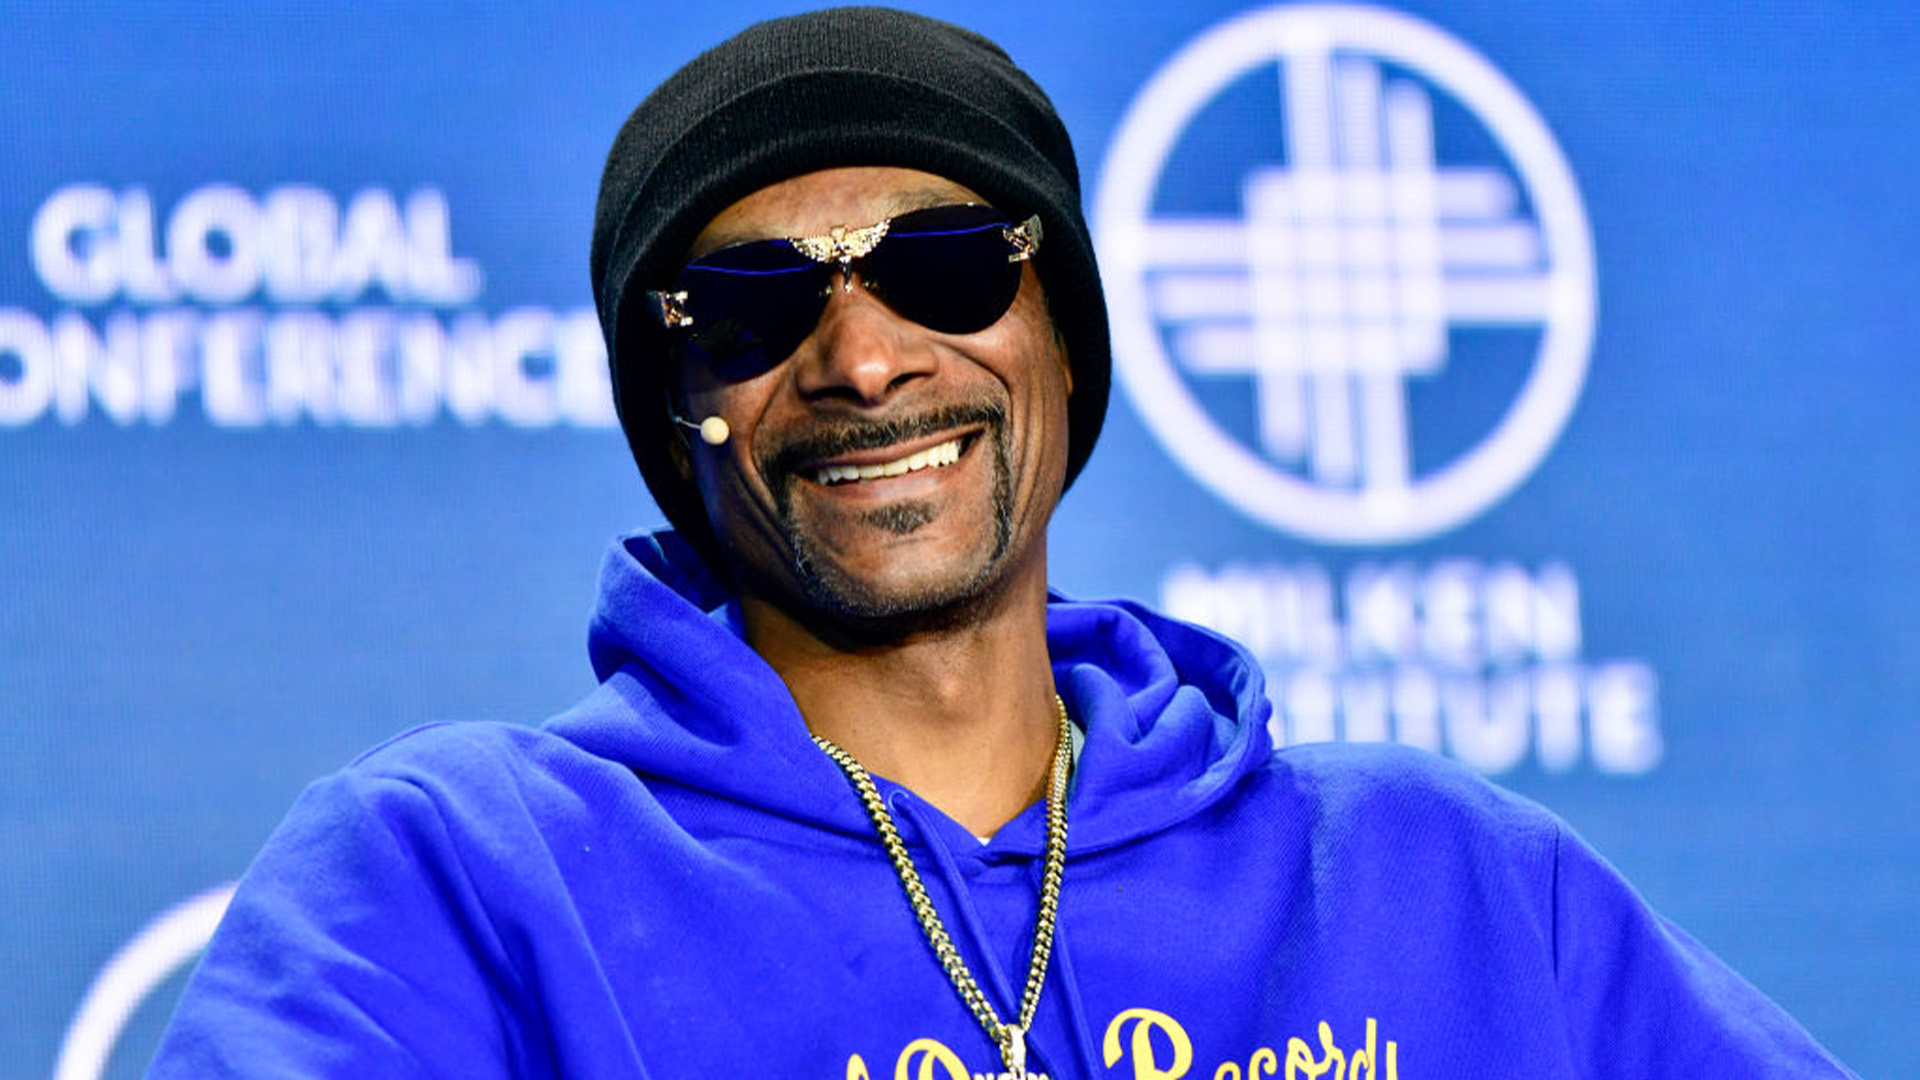 Snoop Dogg Speaks On The State Of Streaming: 'We Do Major Numbers With Streams But It Don't Add Up To The Money'